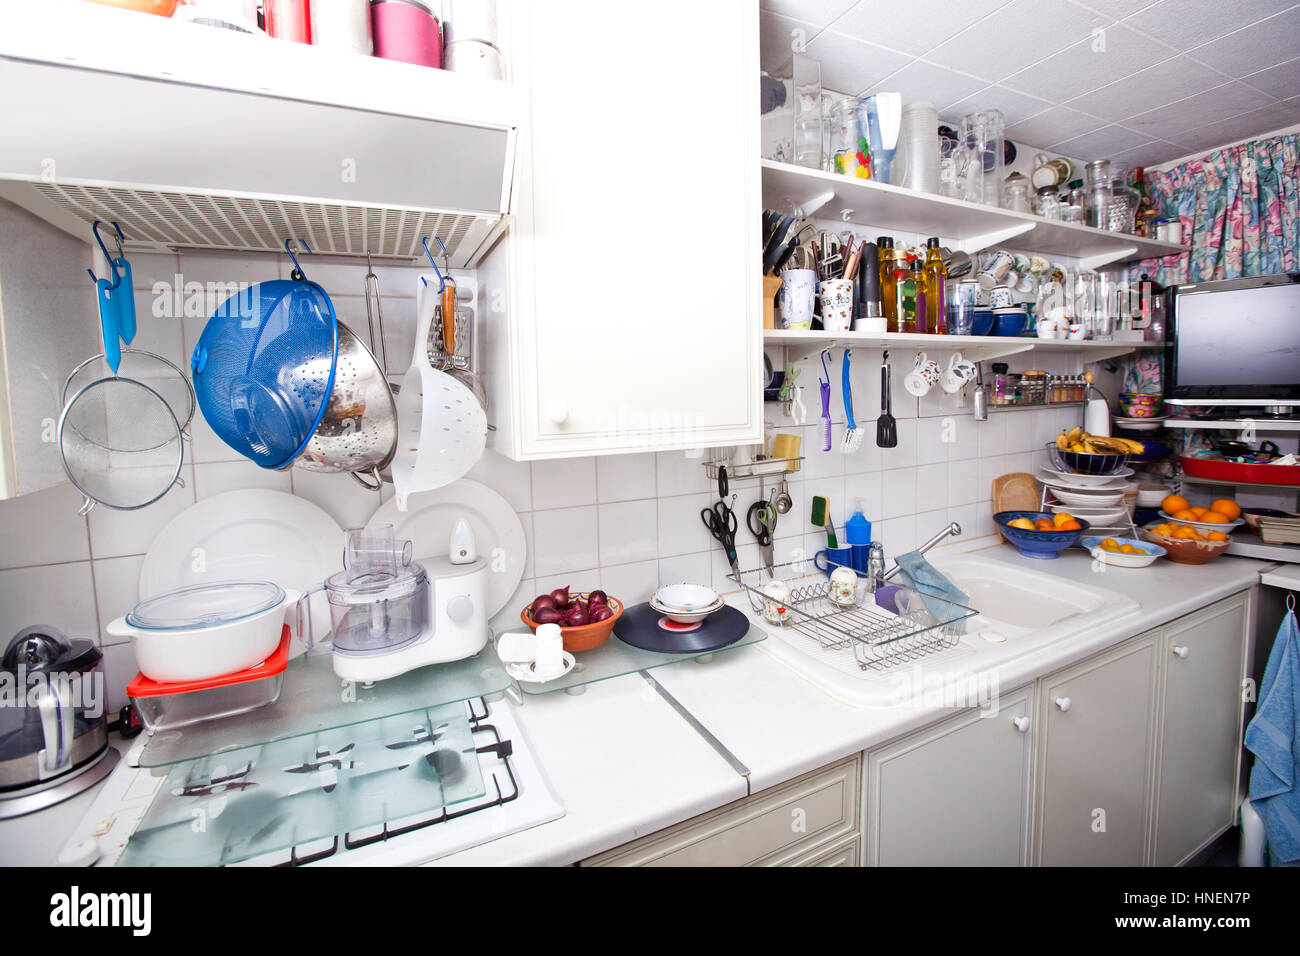 Interior of domestic kitchen with utensils and shelves Stock Photo